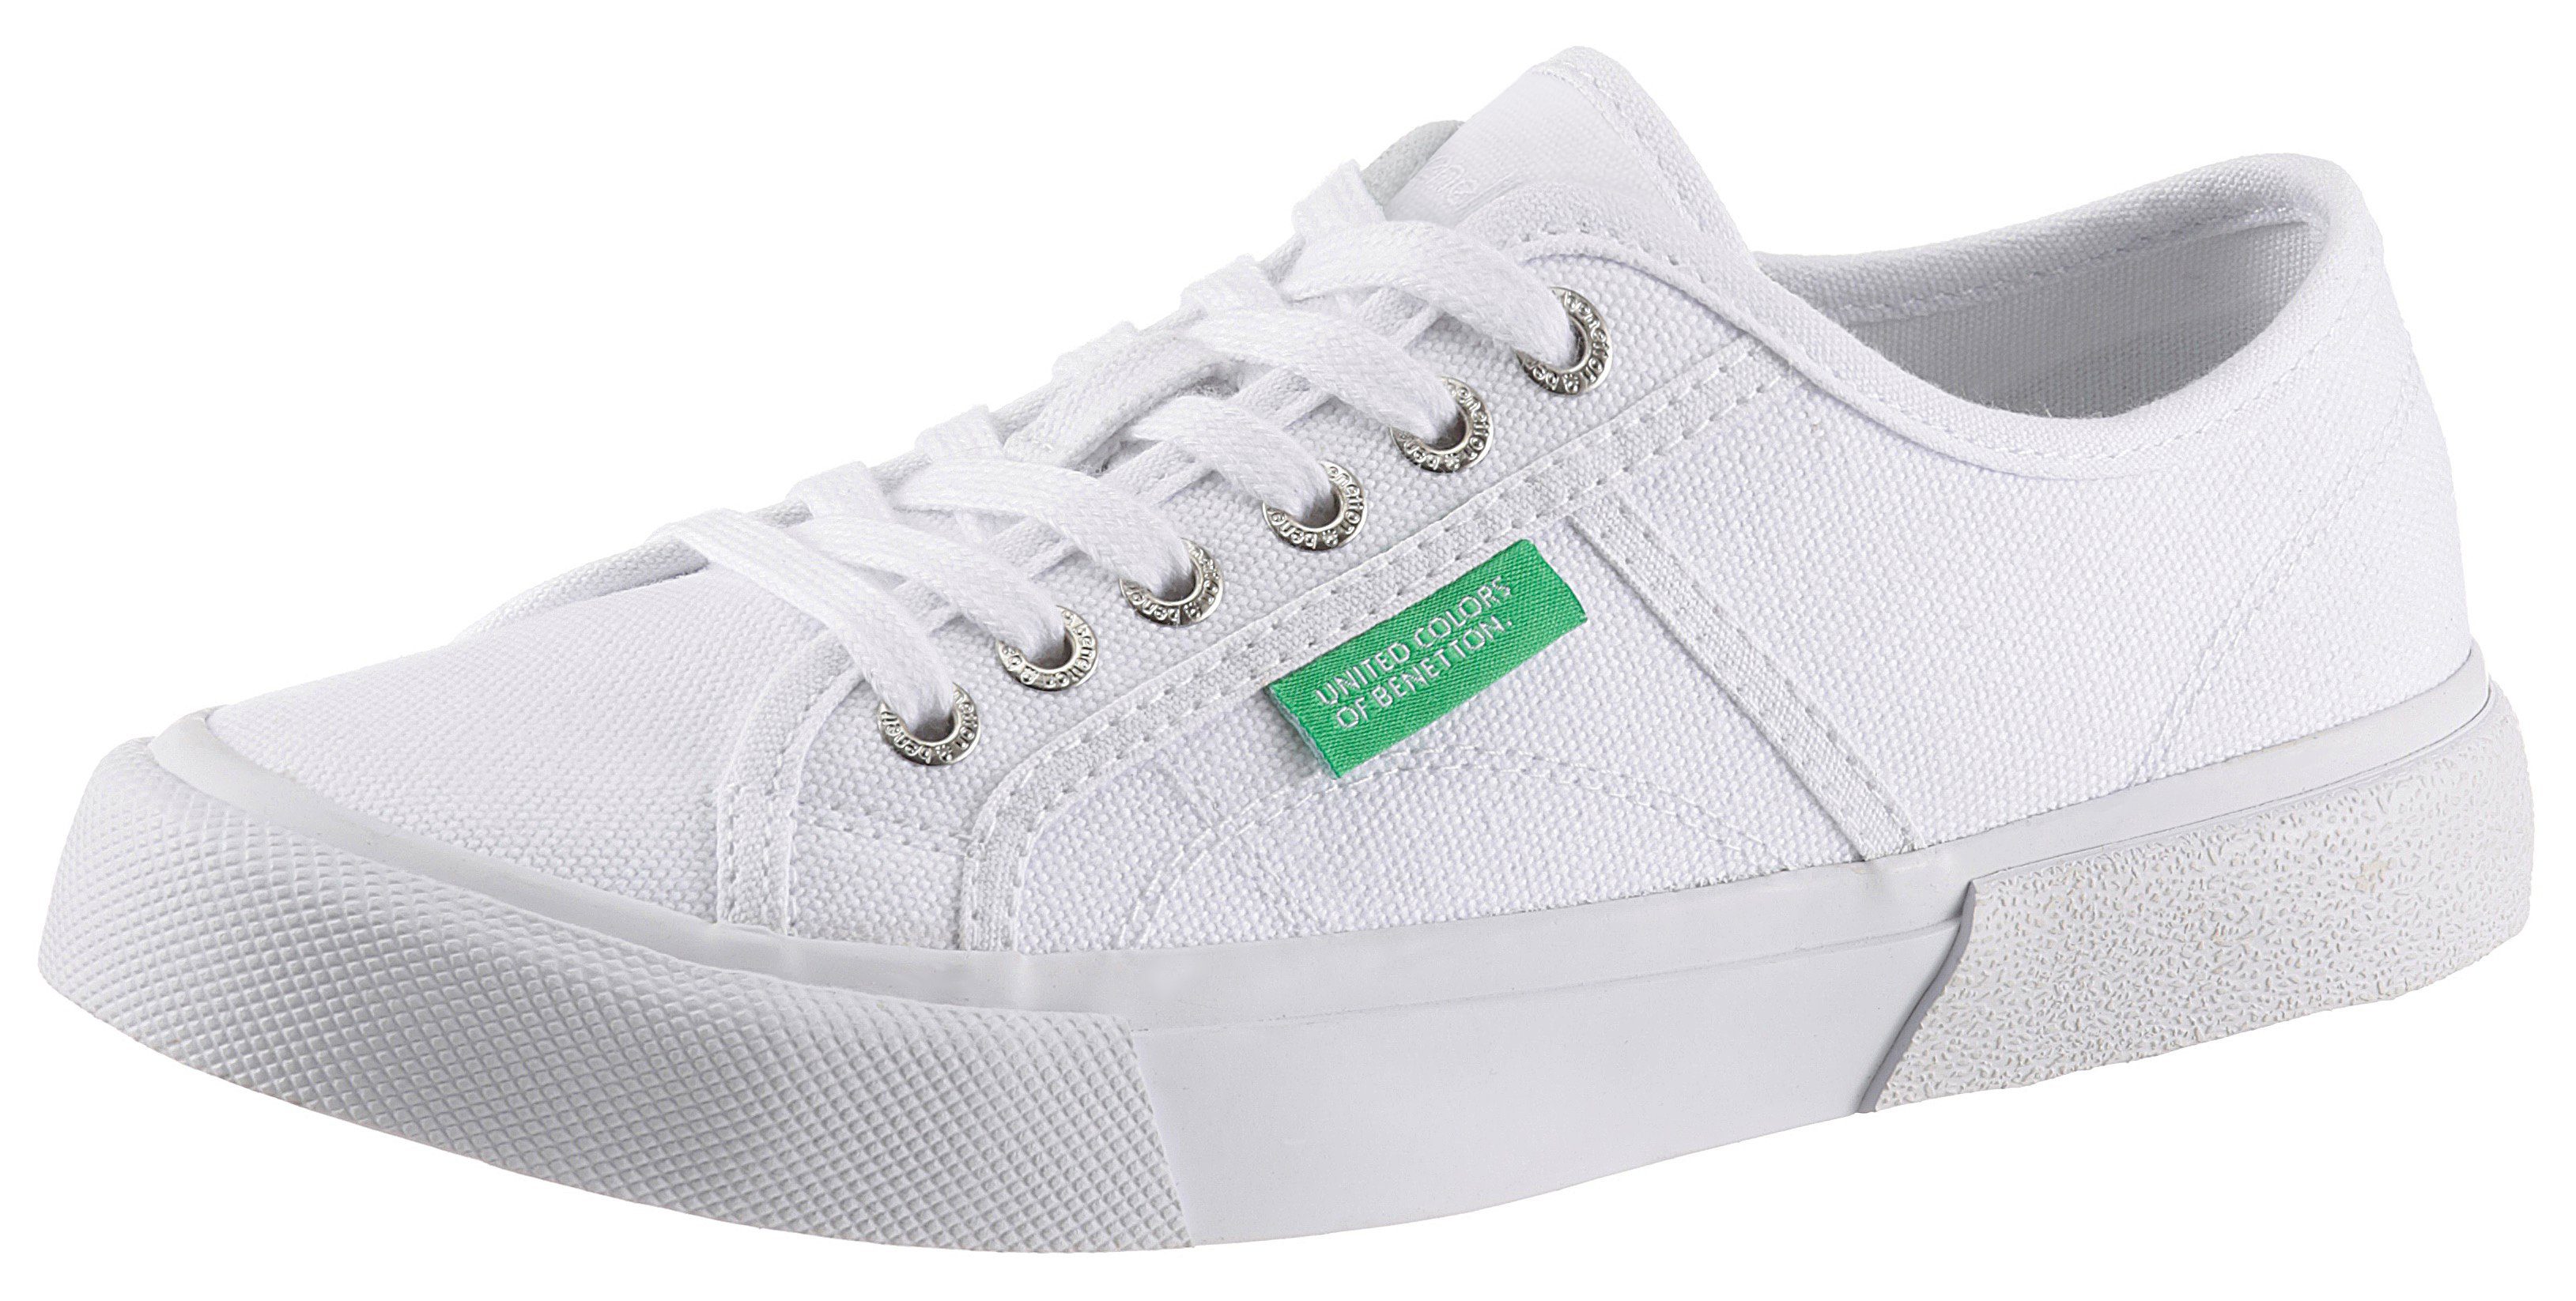 United Colors of Benetton »Tyke« Sneaker mit Label | OTTO